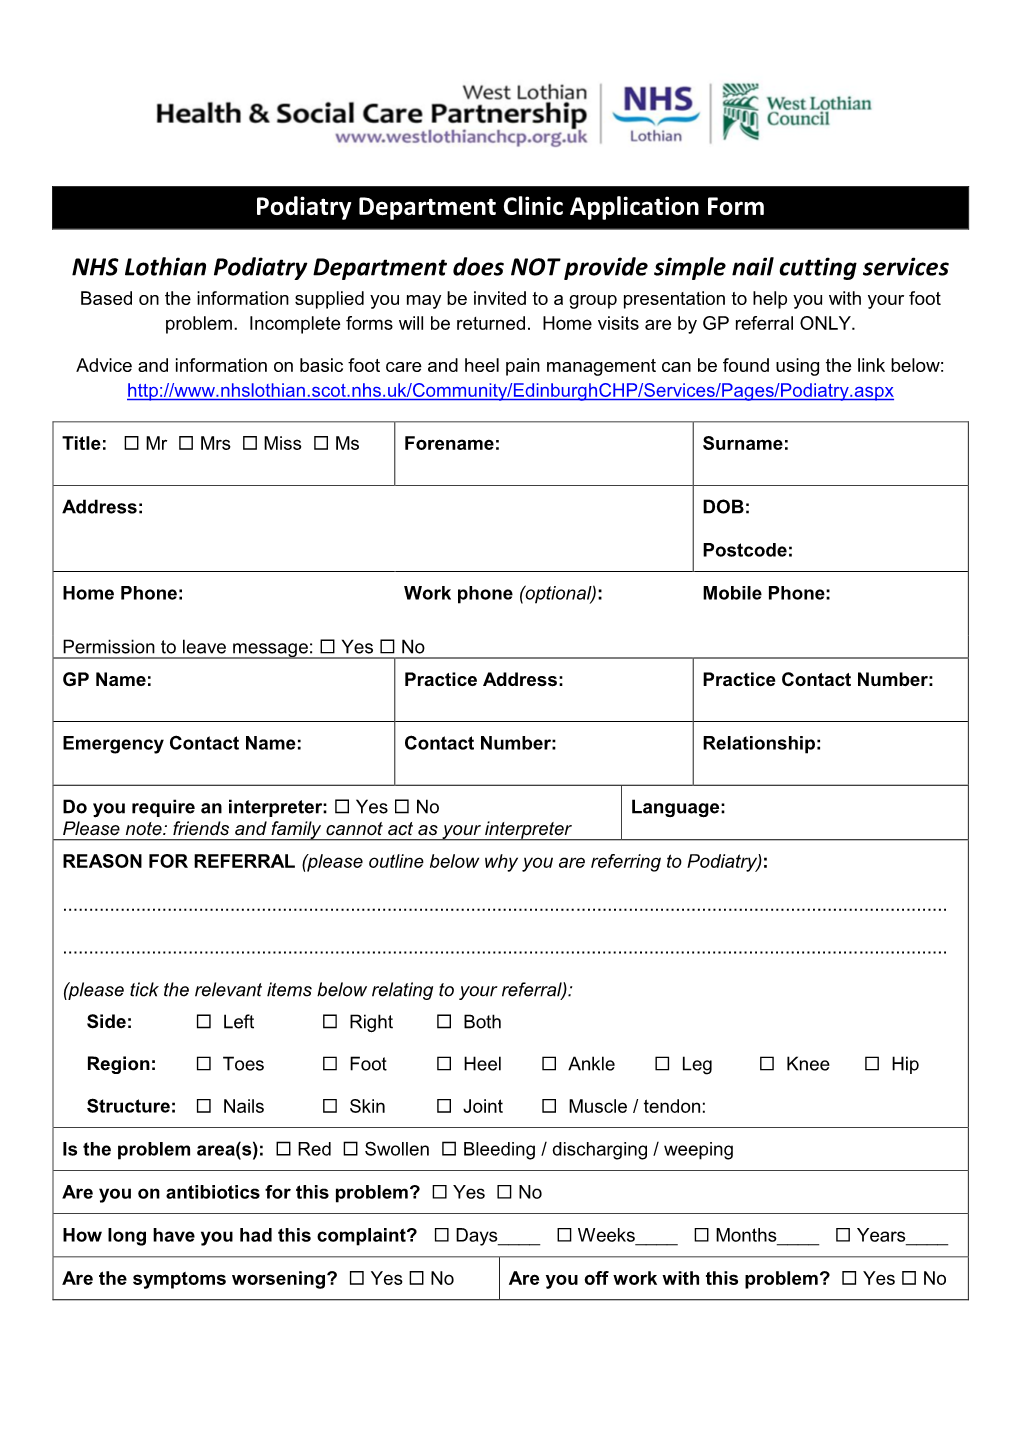 Podiatry Department Clinic Application Form NHS Lothian